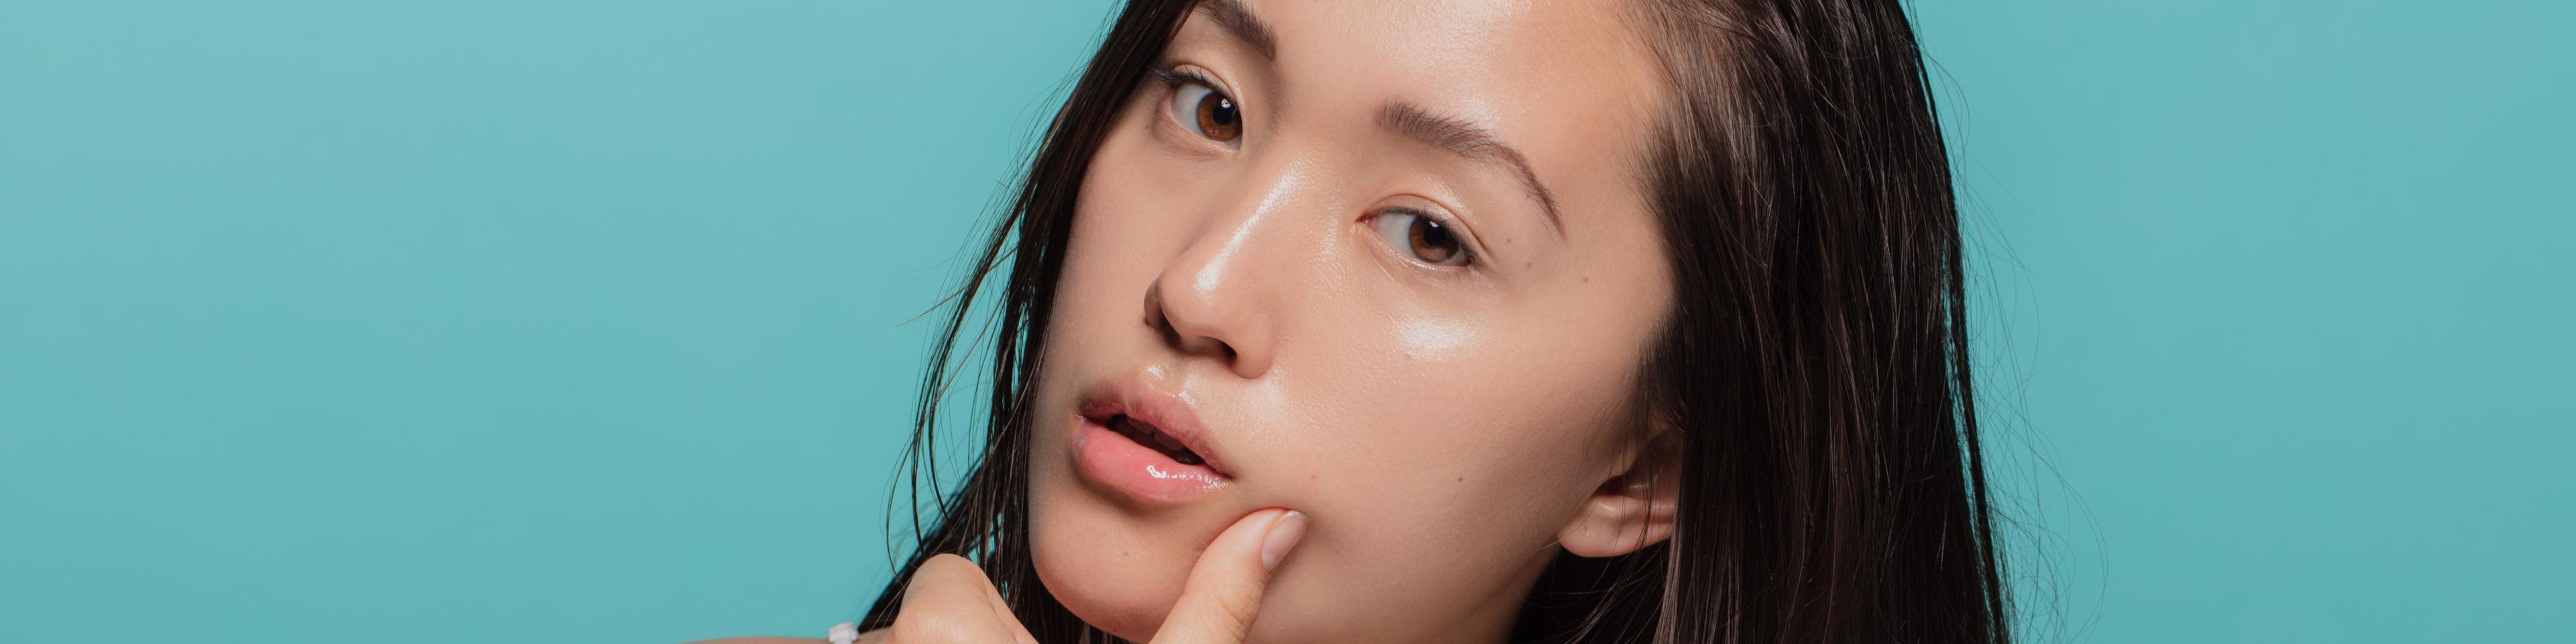 How to Get a Healthy Glow This Summer